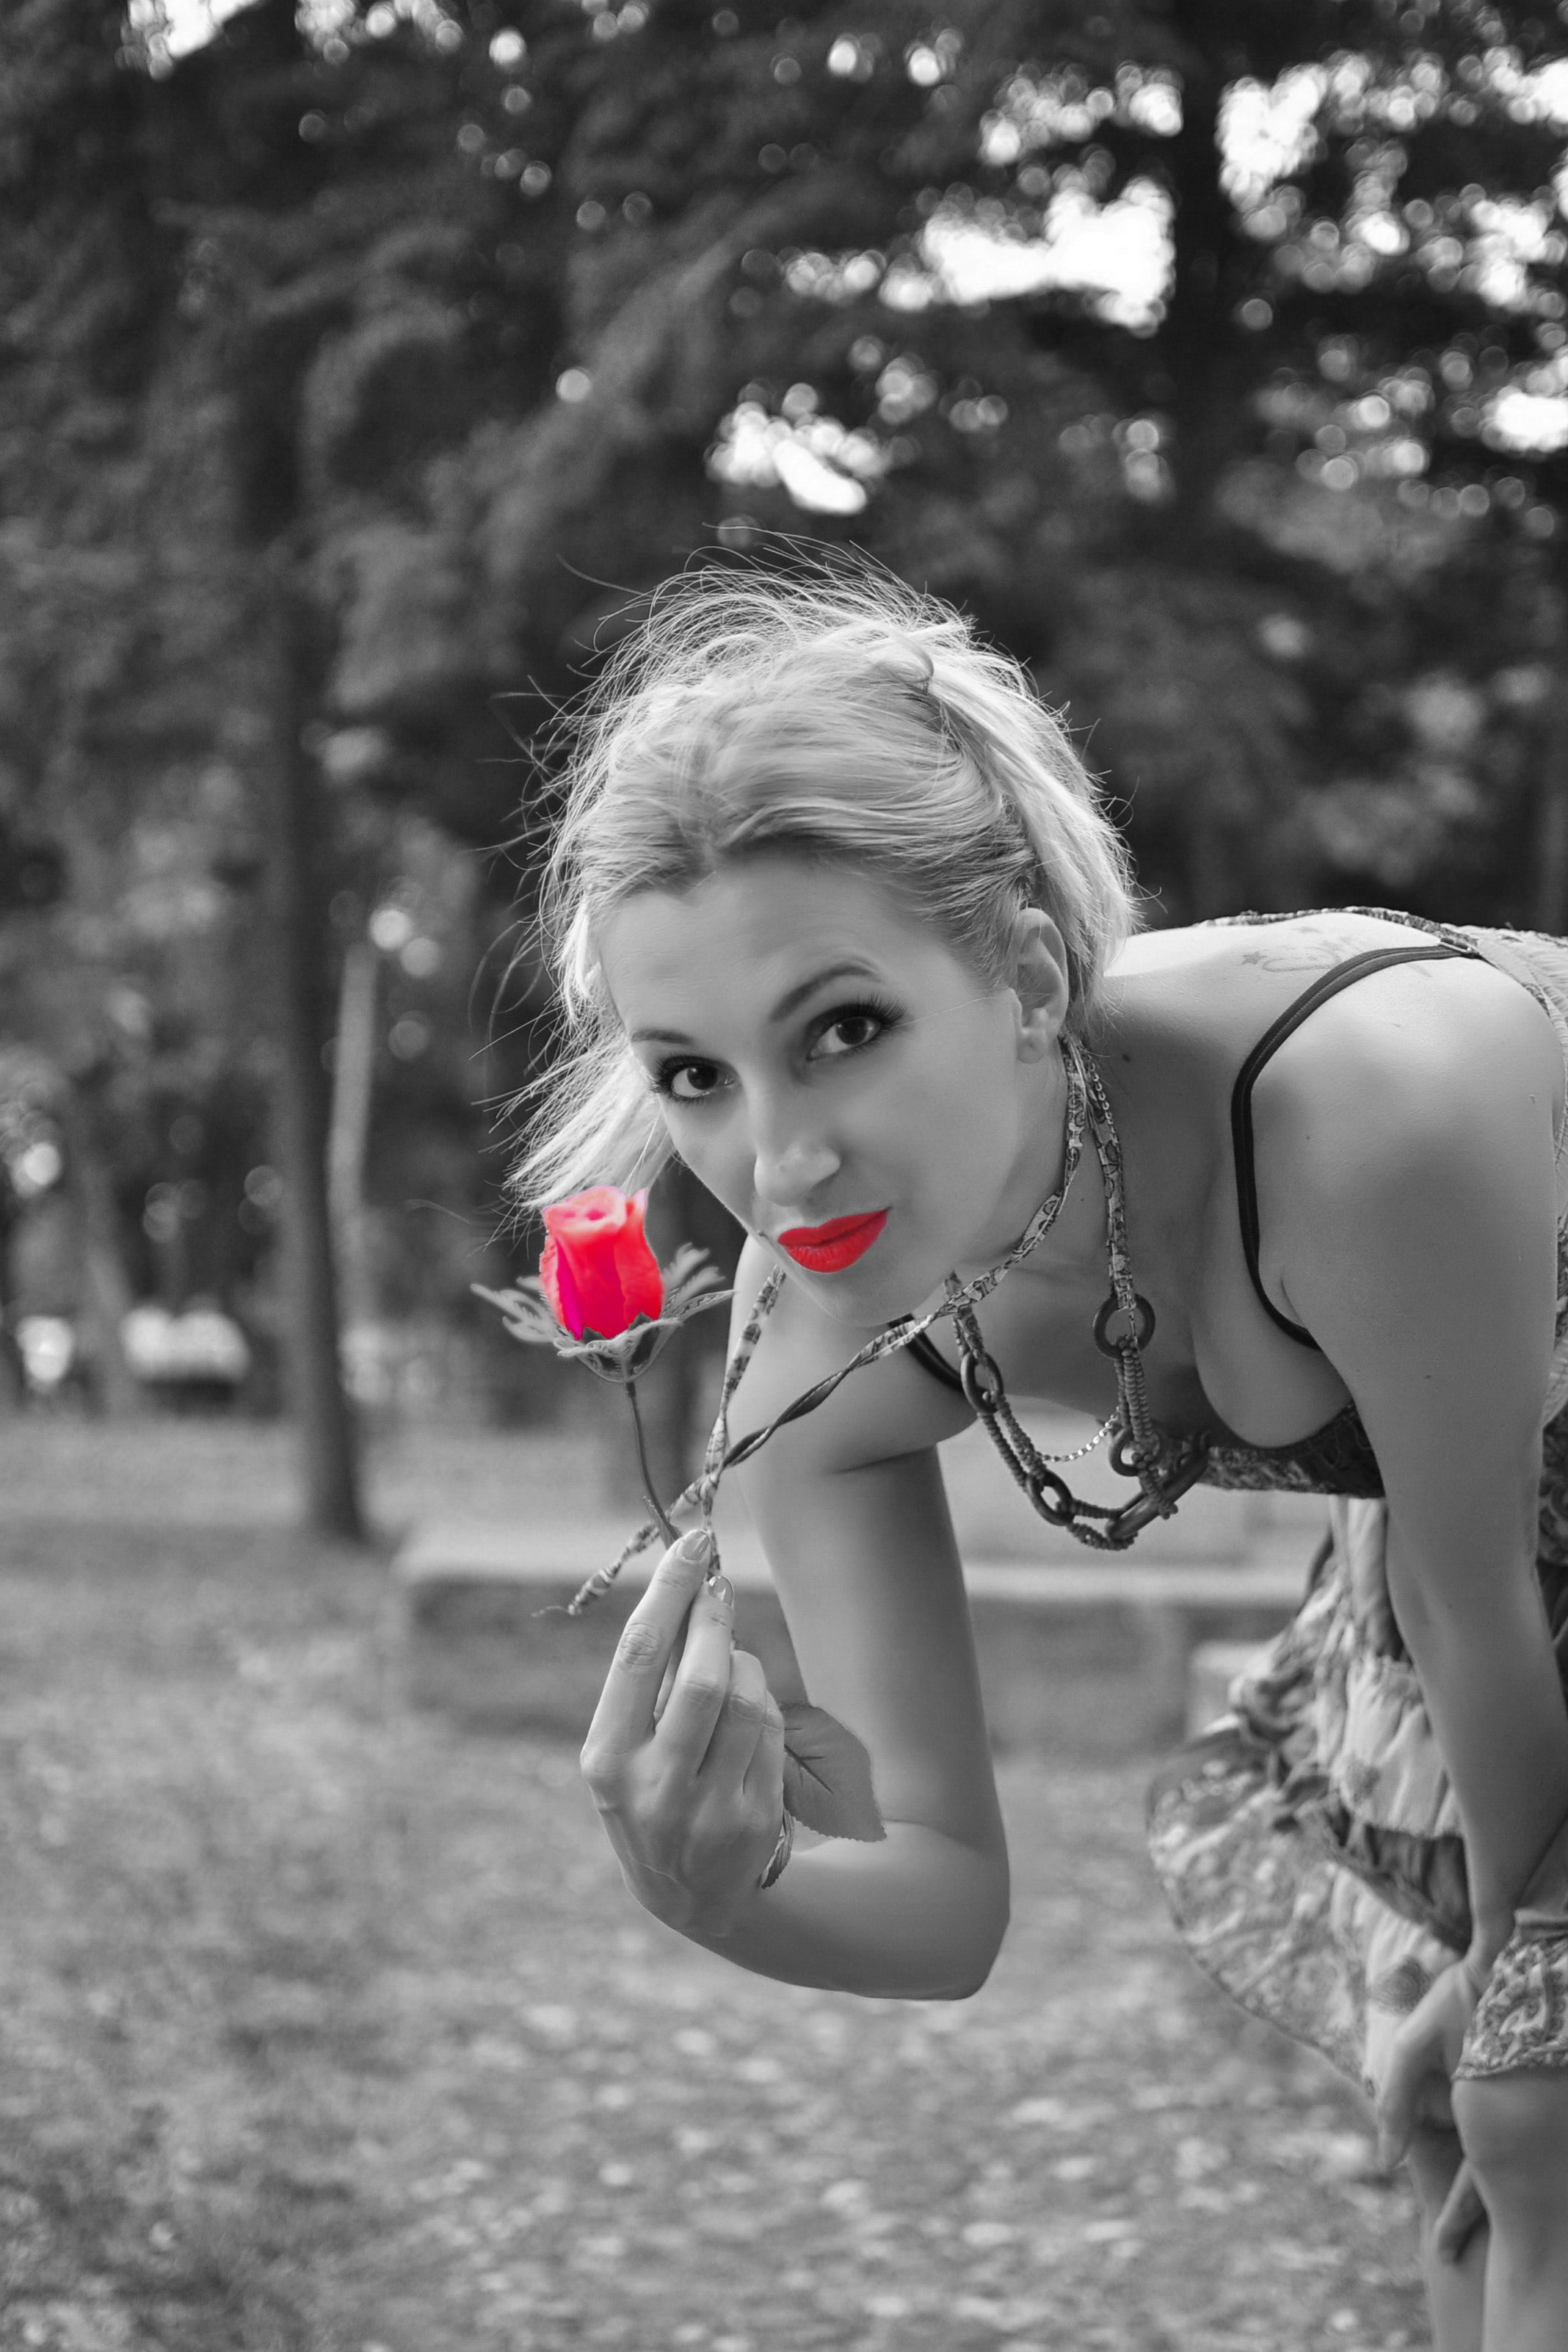 Selective color photo of woman holding rose